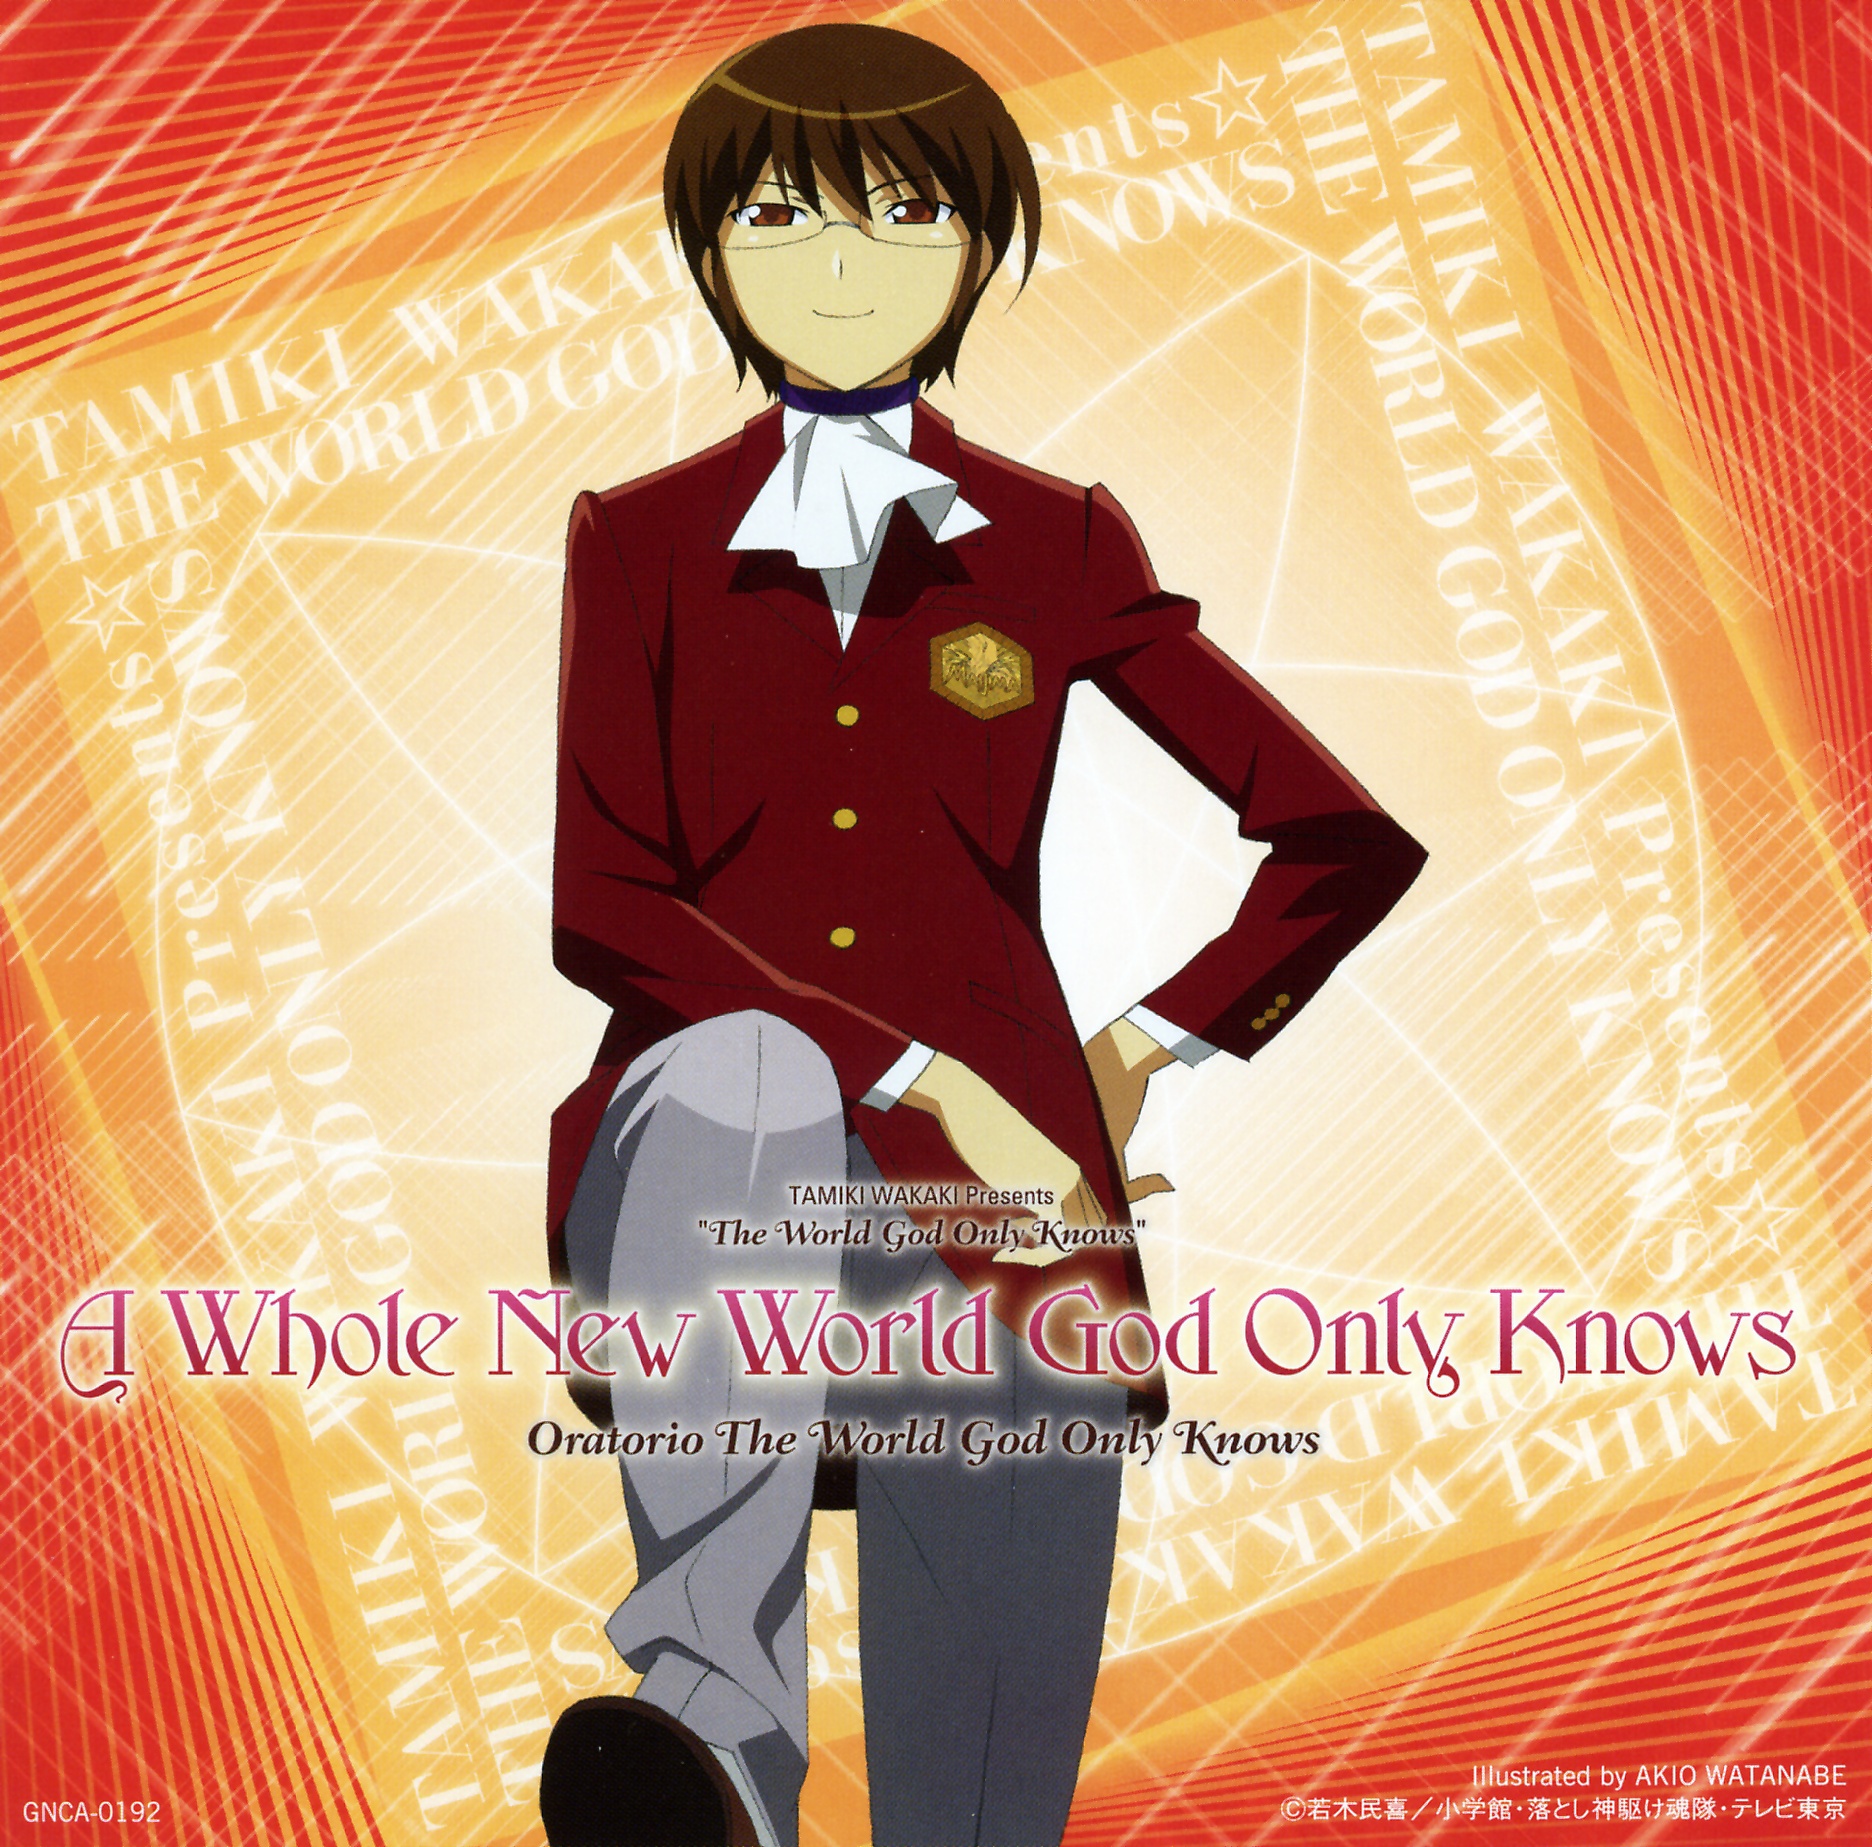 A Whole New World God Only Knows | The World God Only Knows Wiki